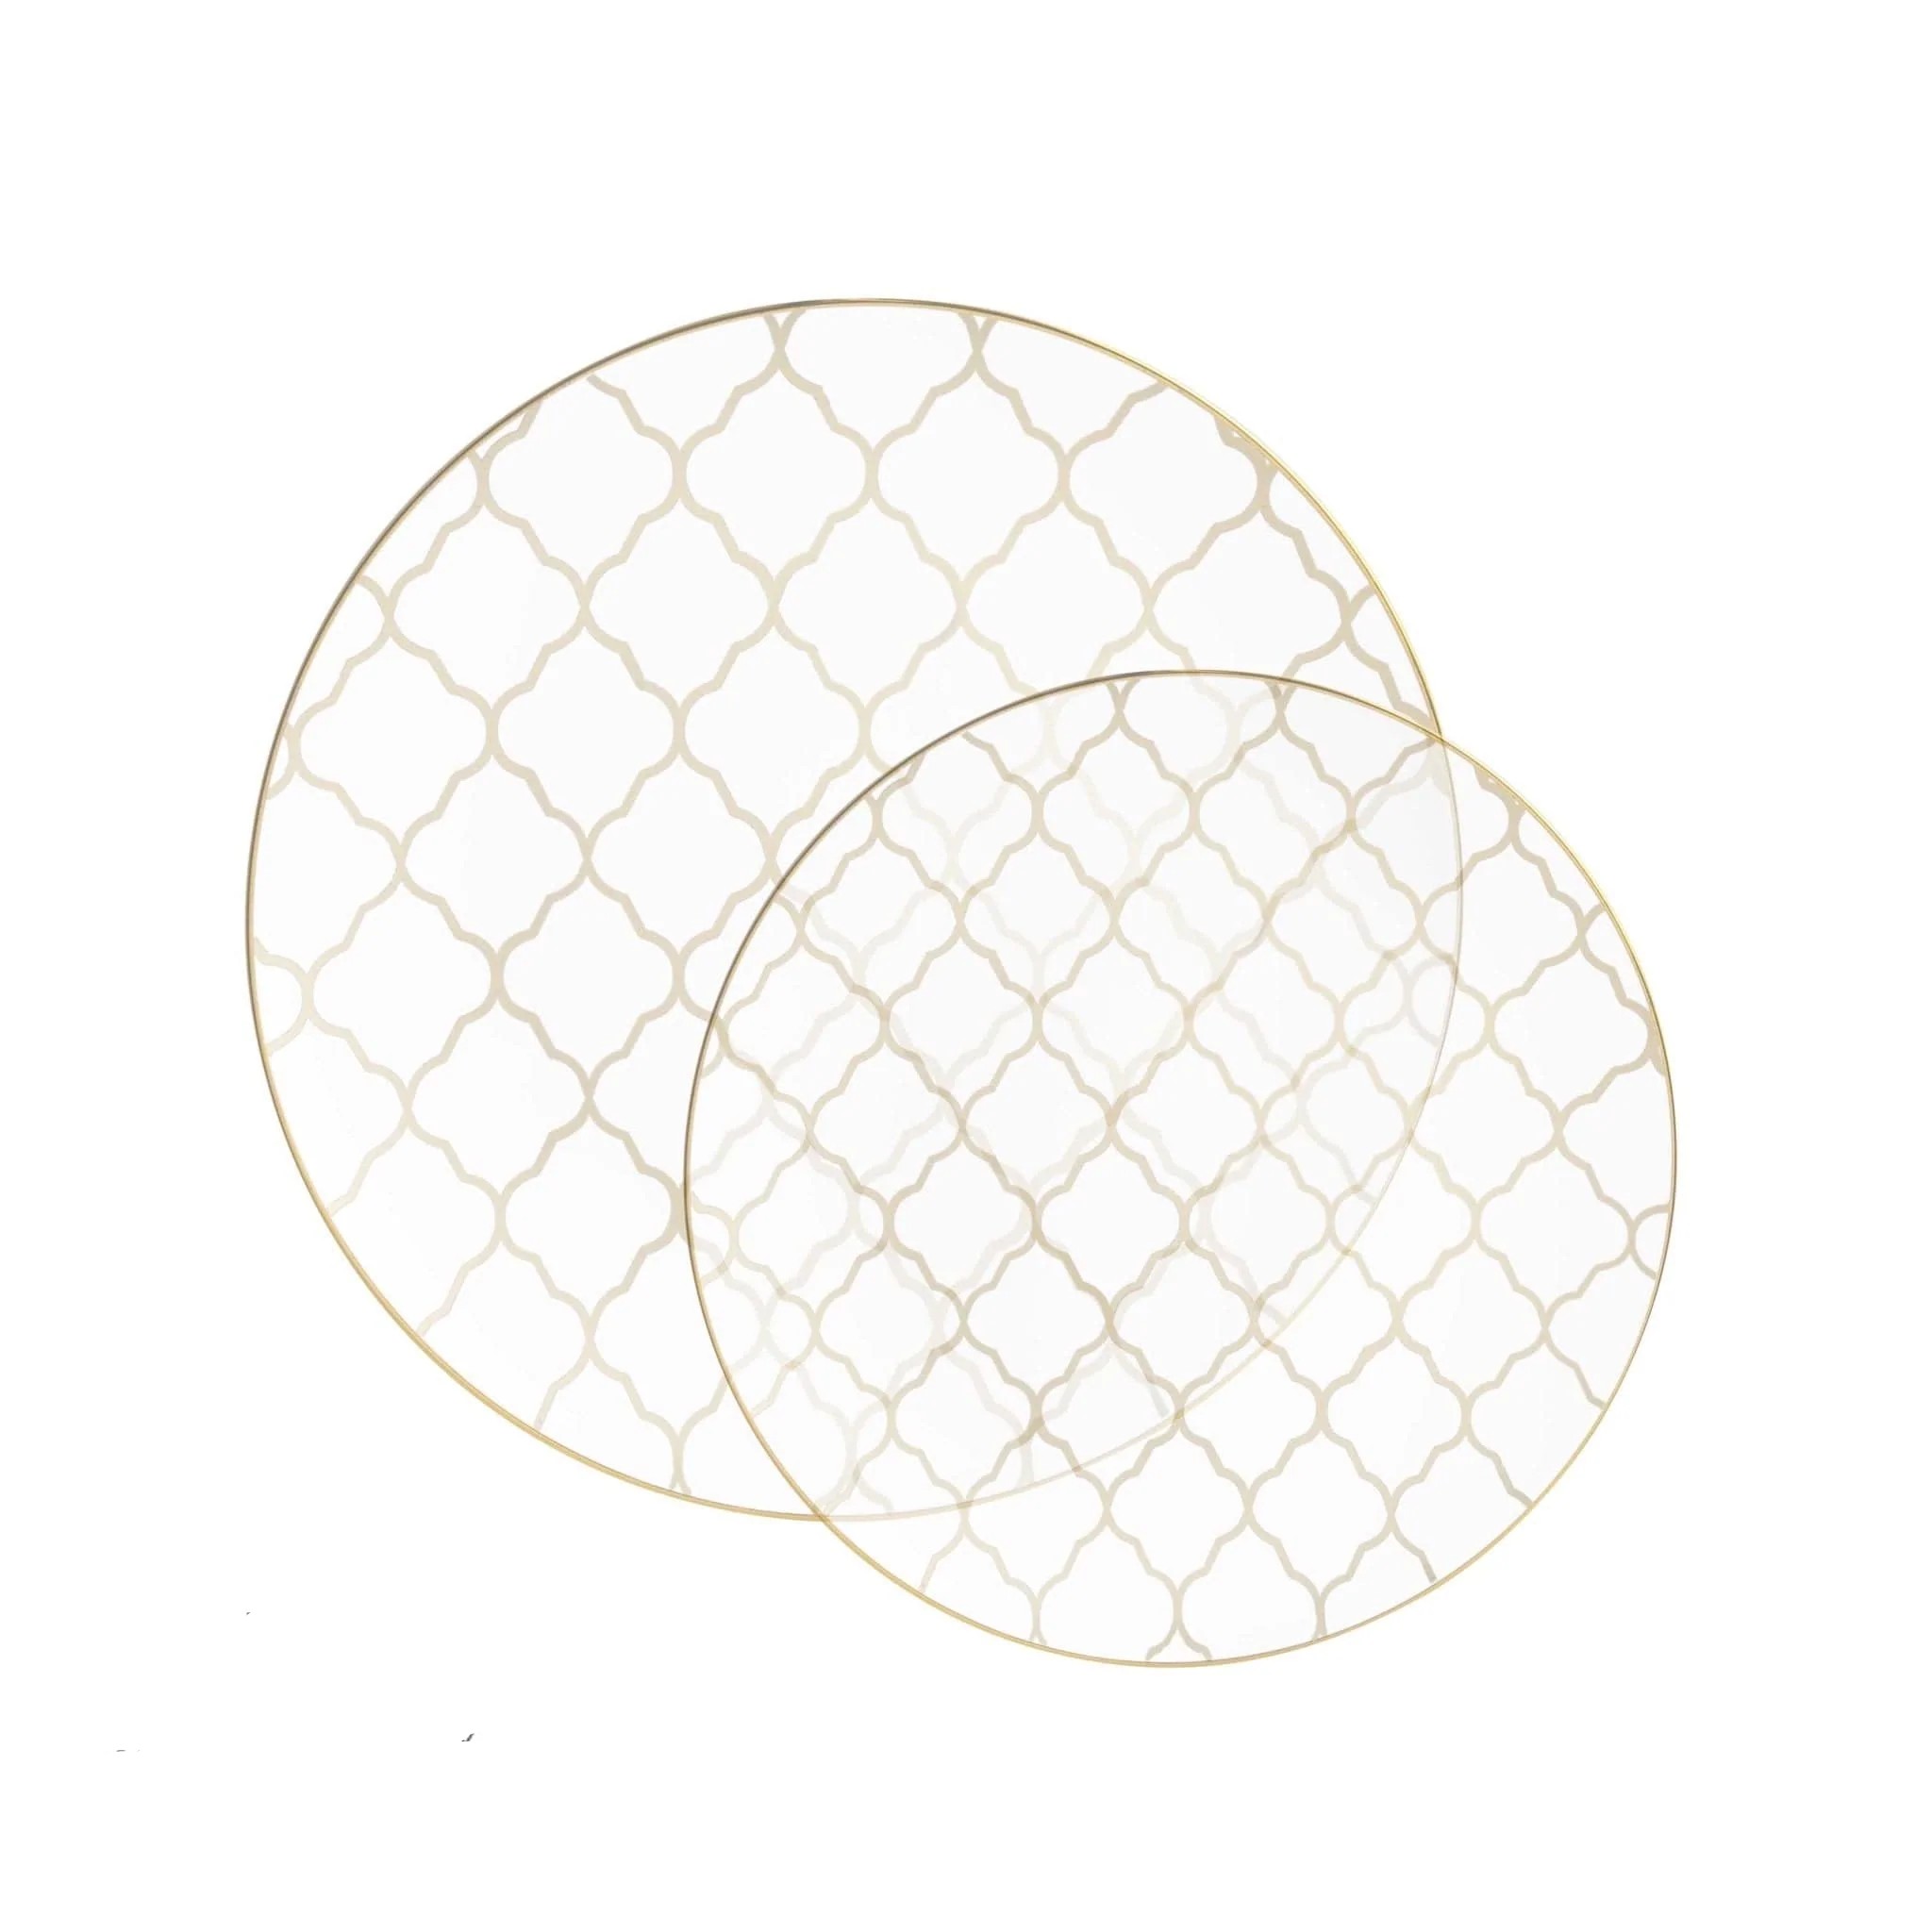 Luxe Party Clear with Gold Lattice Pattern Plastic Appetizer Plate 7.25